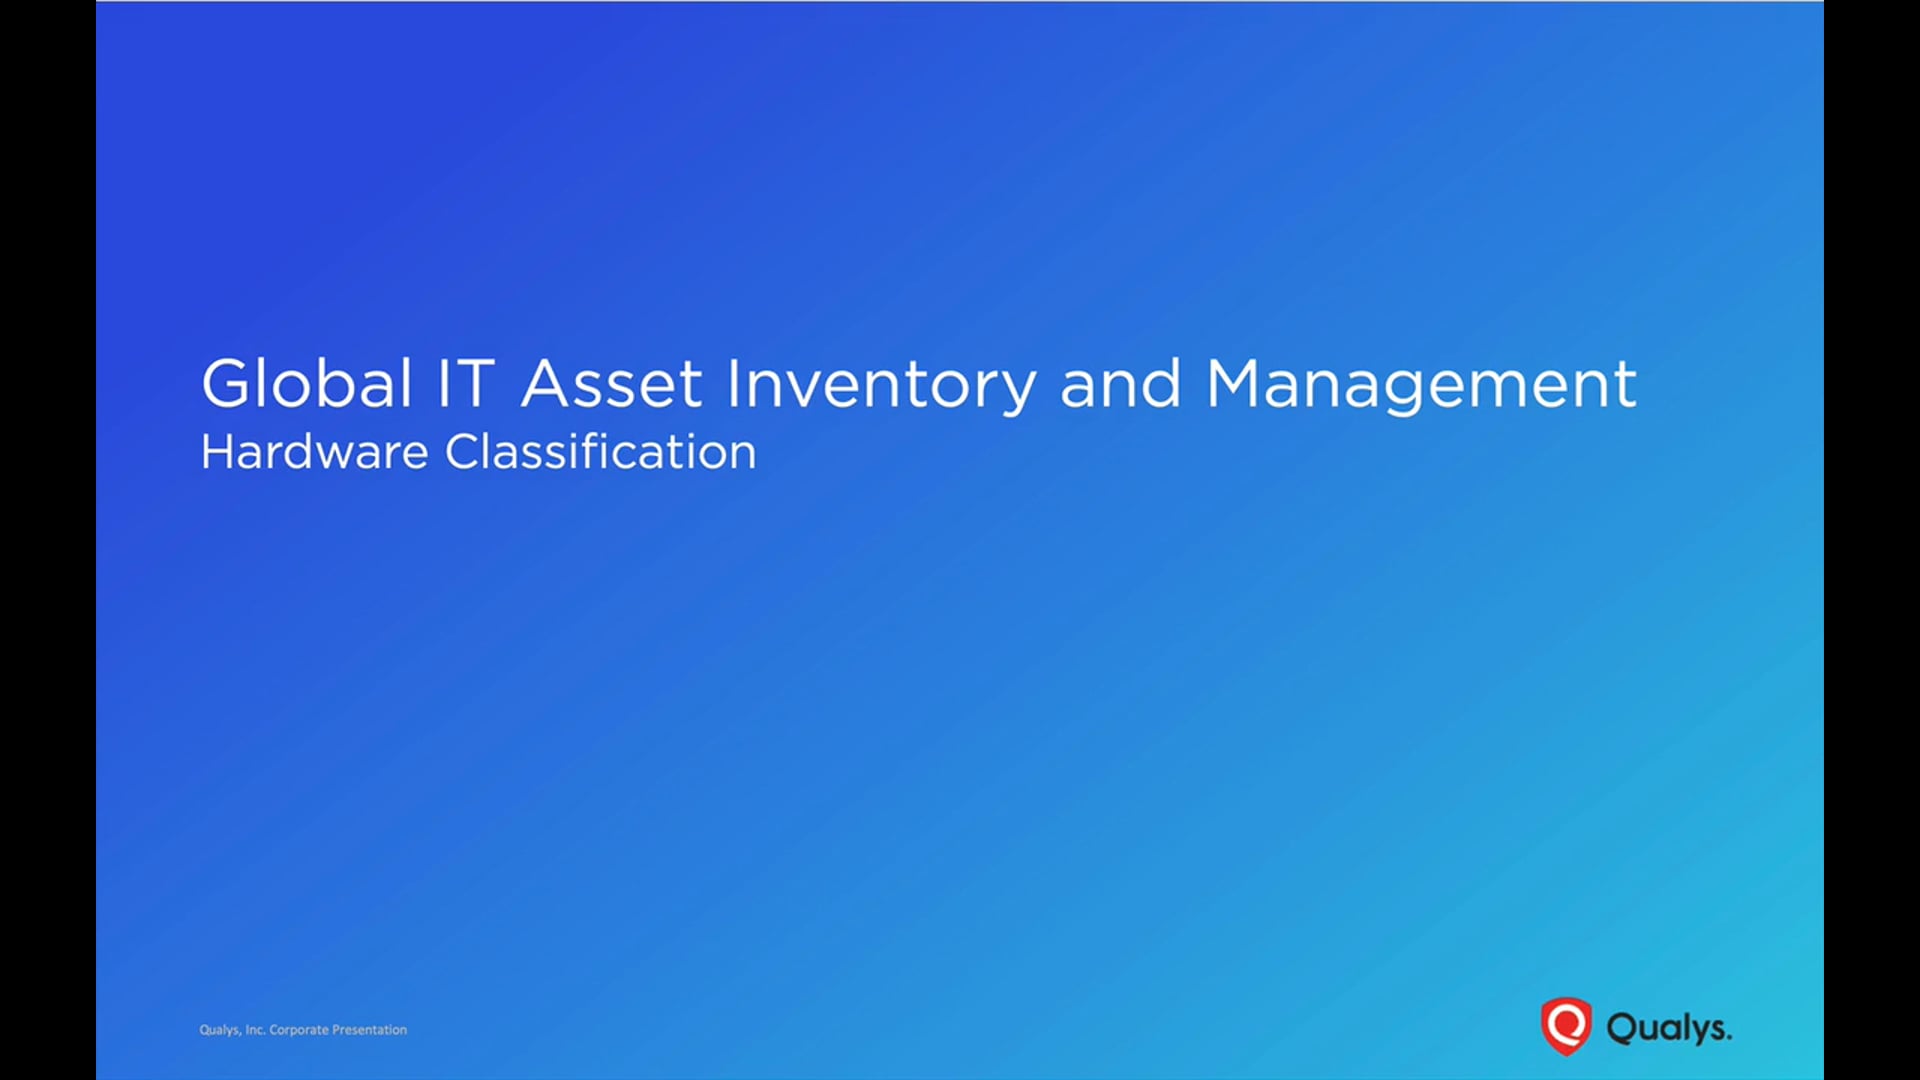 Global IT Asset Inventory - Hardware Classification